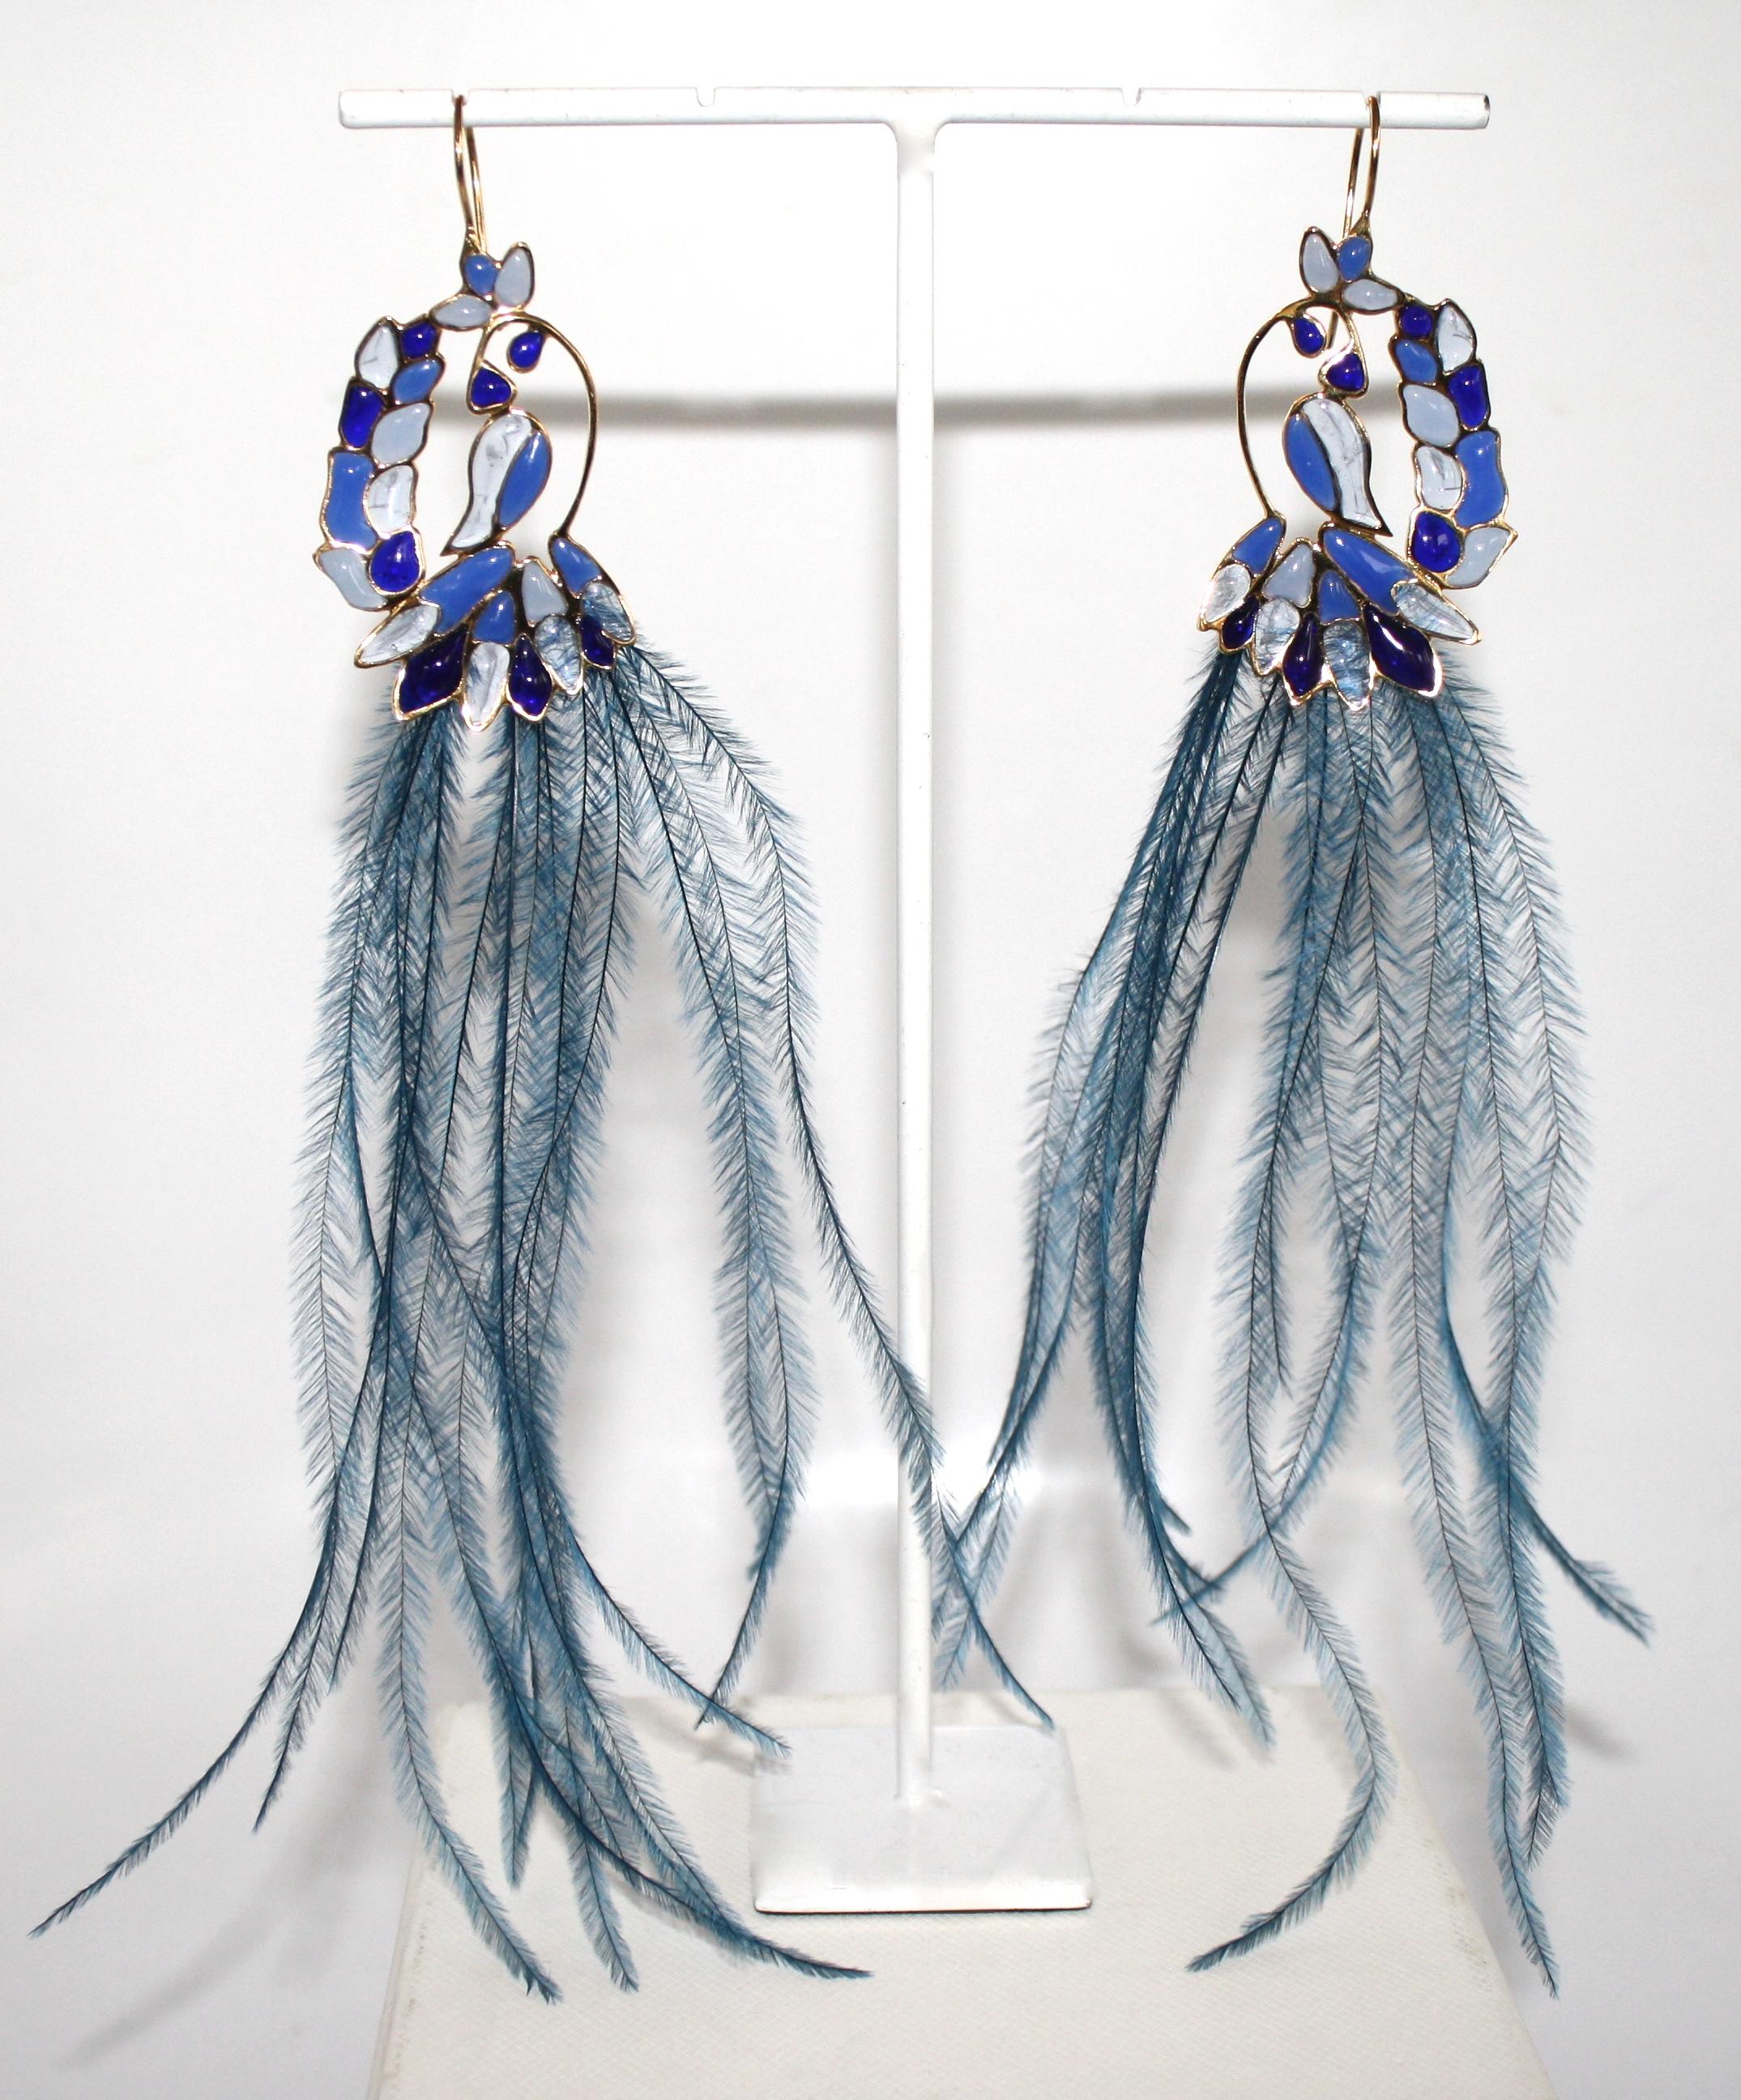 Poured glass pierced earrings with blue feathers from Gripoix. 